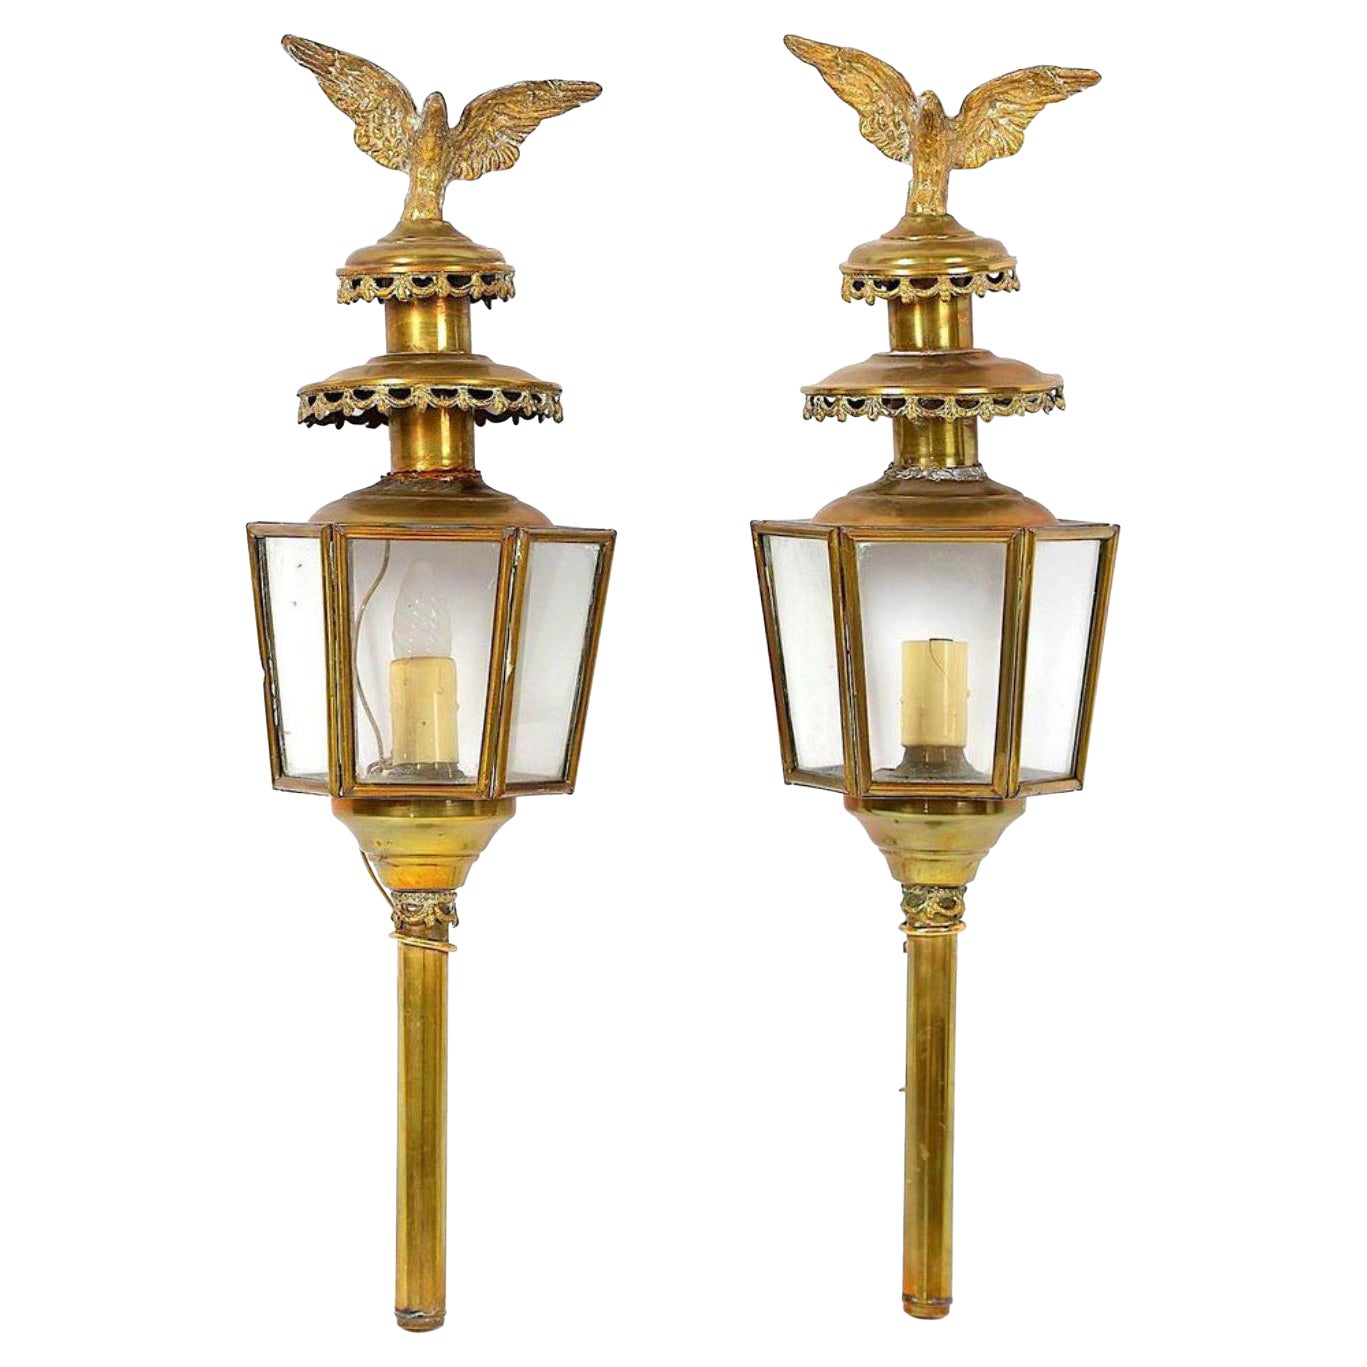 19th Century French Pair of Brass Carriage Lanterns with Eagles on the Top